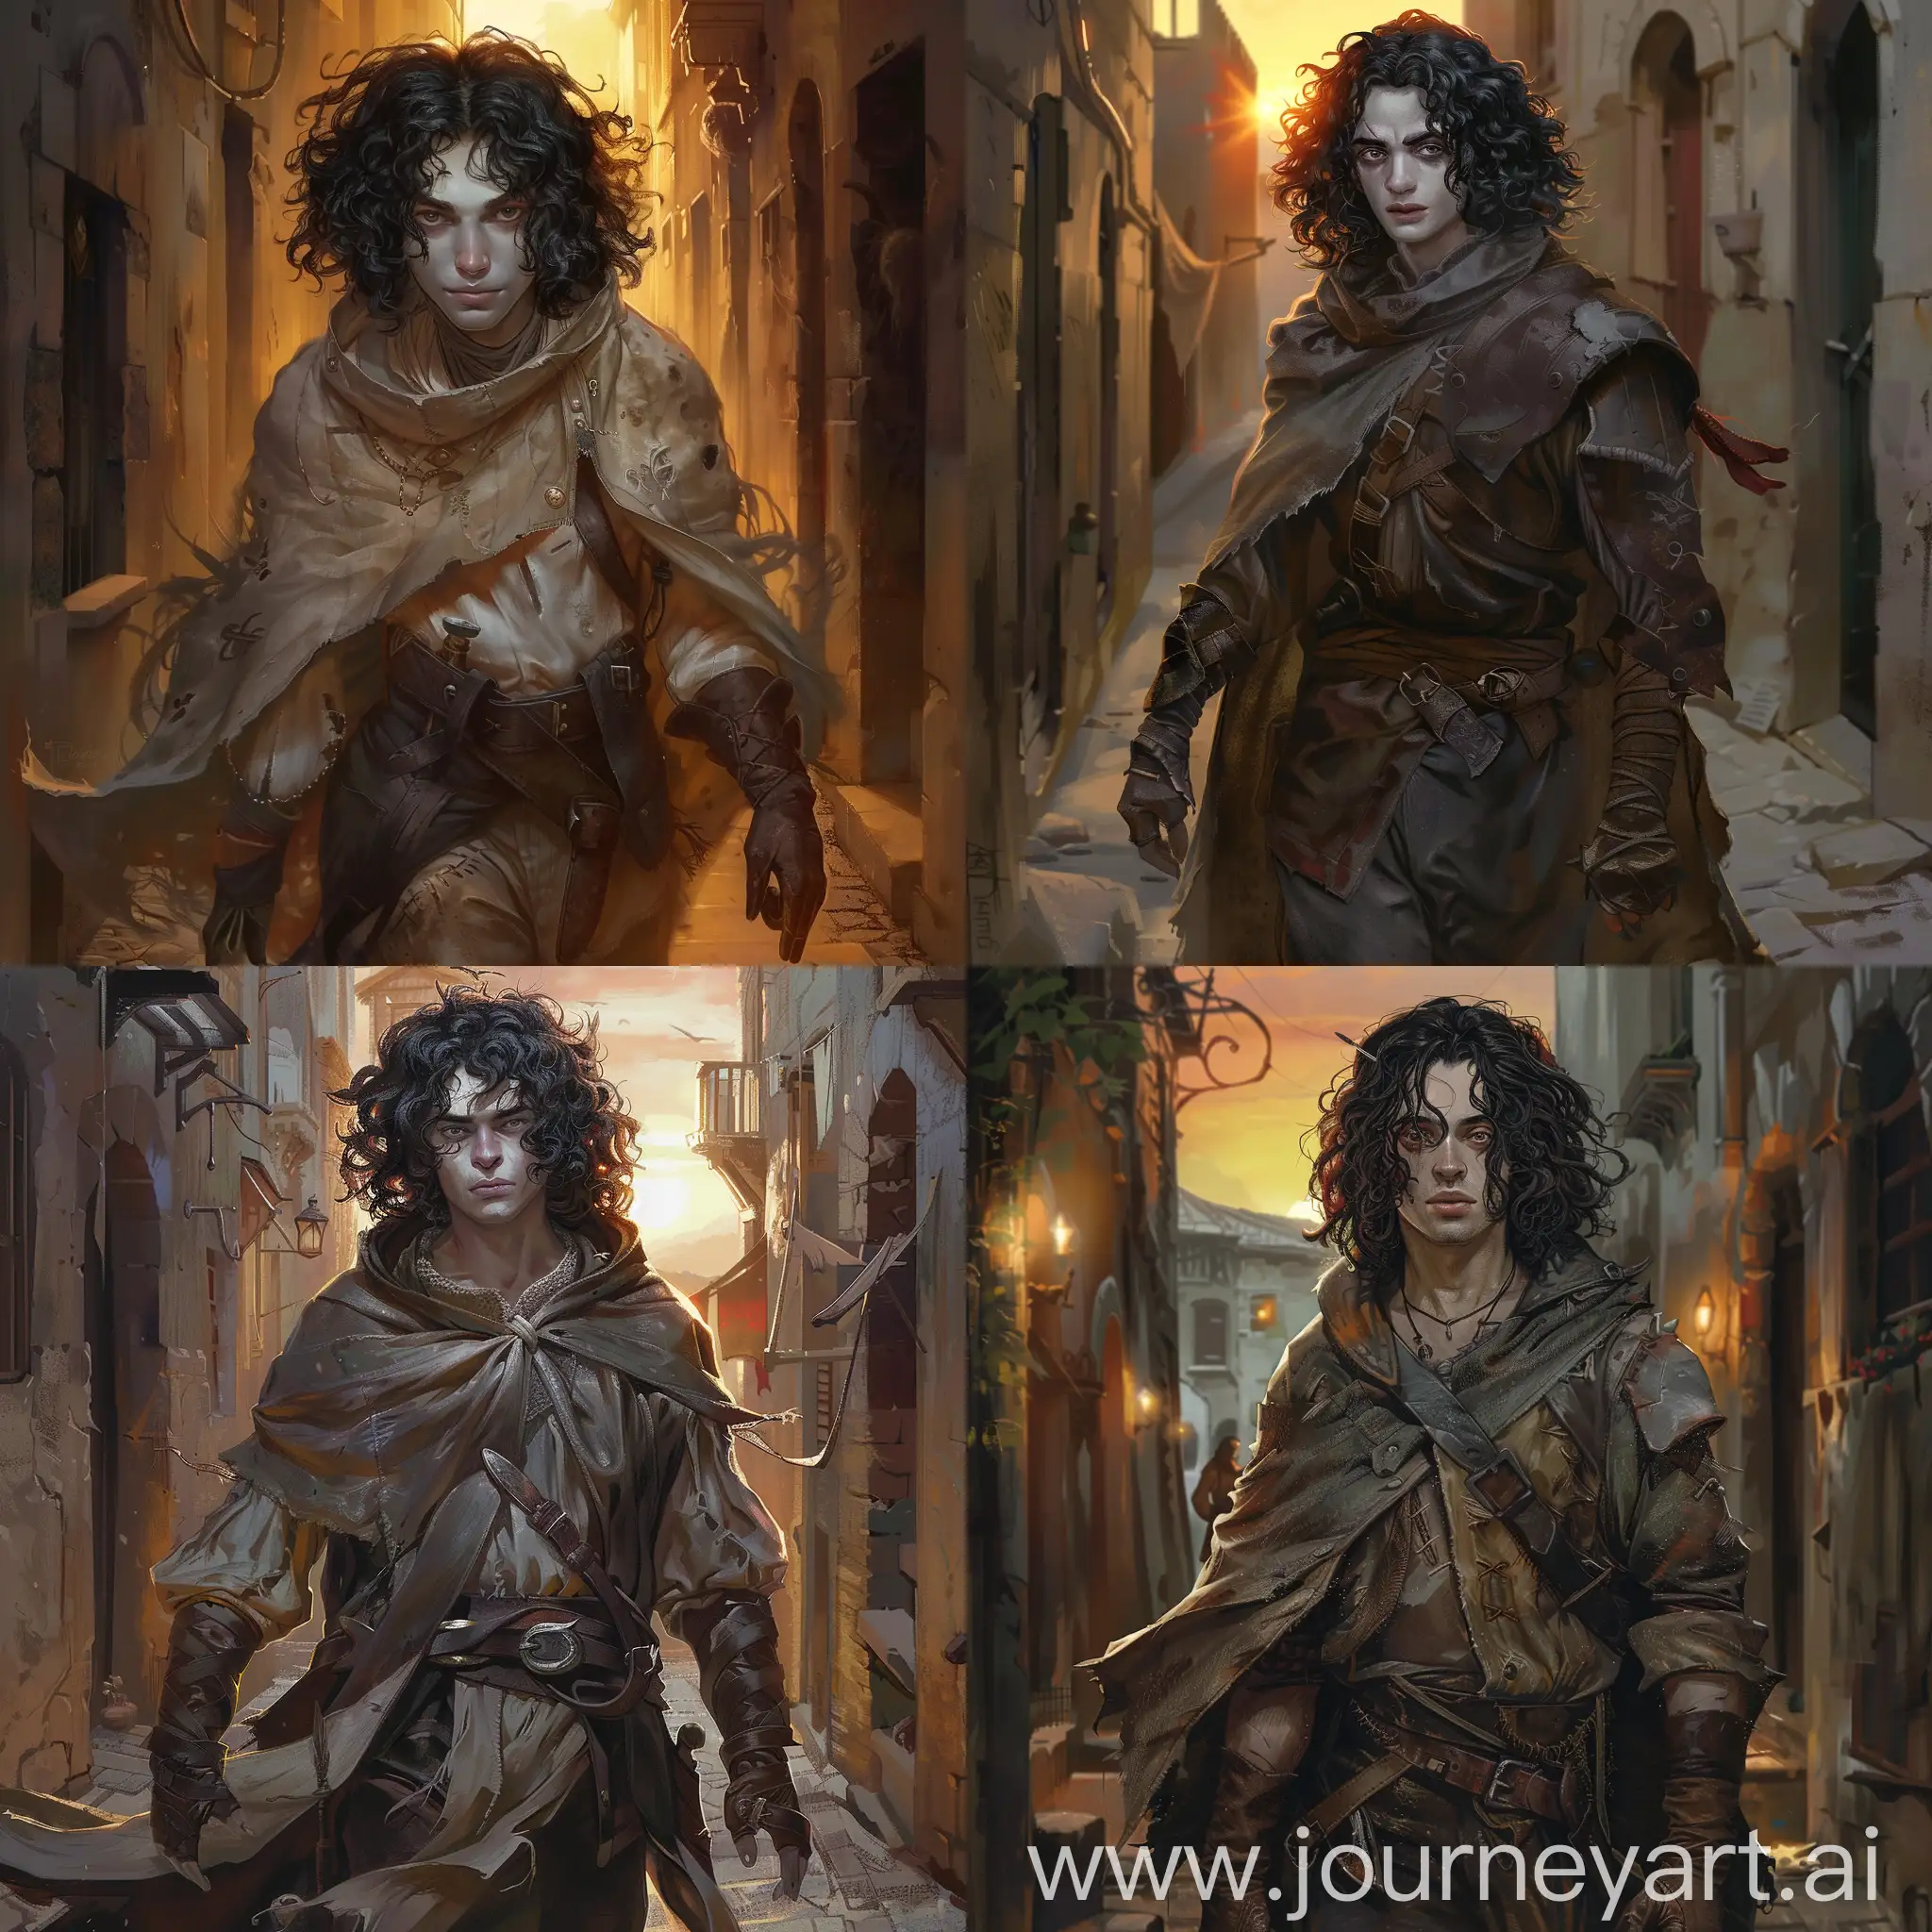 Young-Artificer-Navigating-Sunset-Alley-in-Dungeons-and-Dragons-Scene